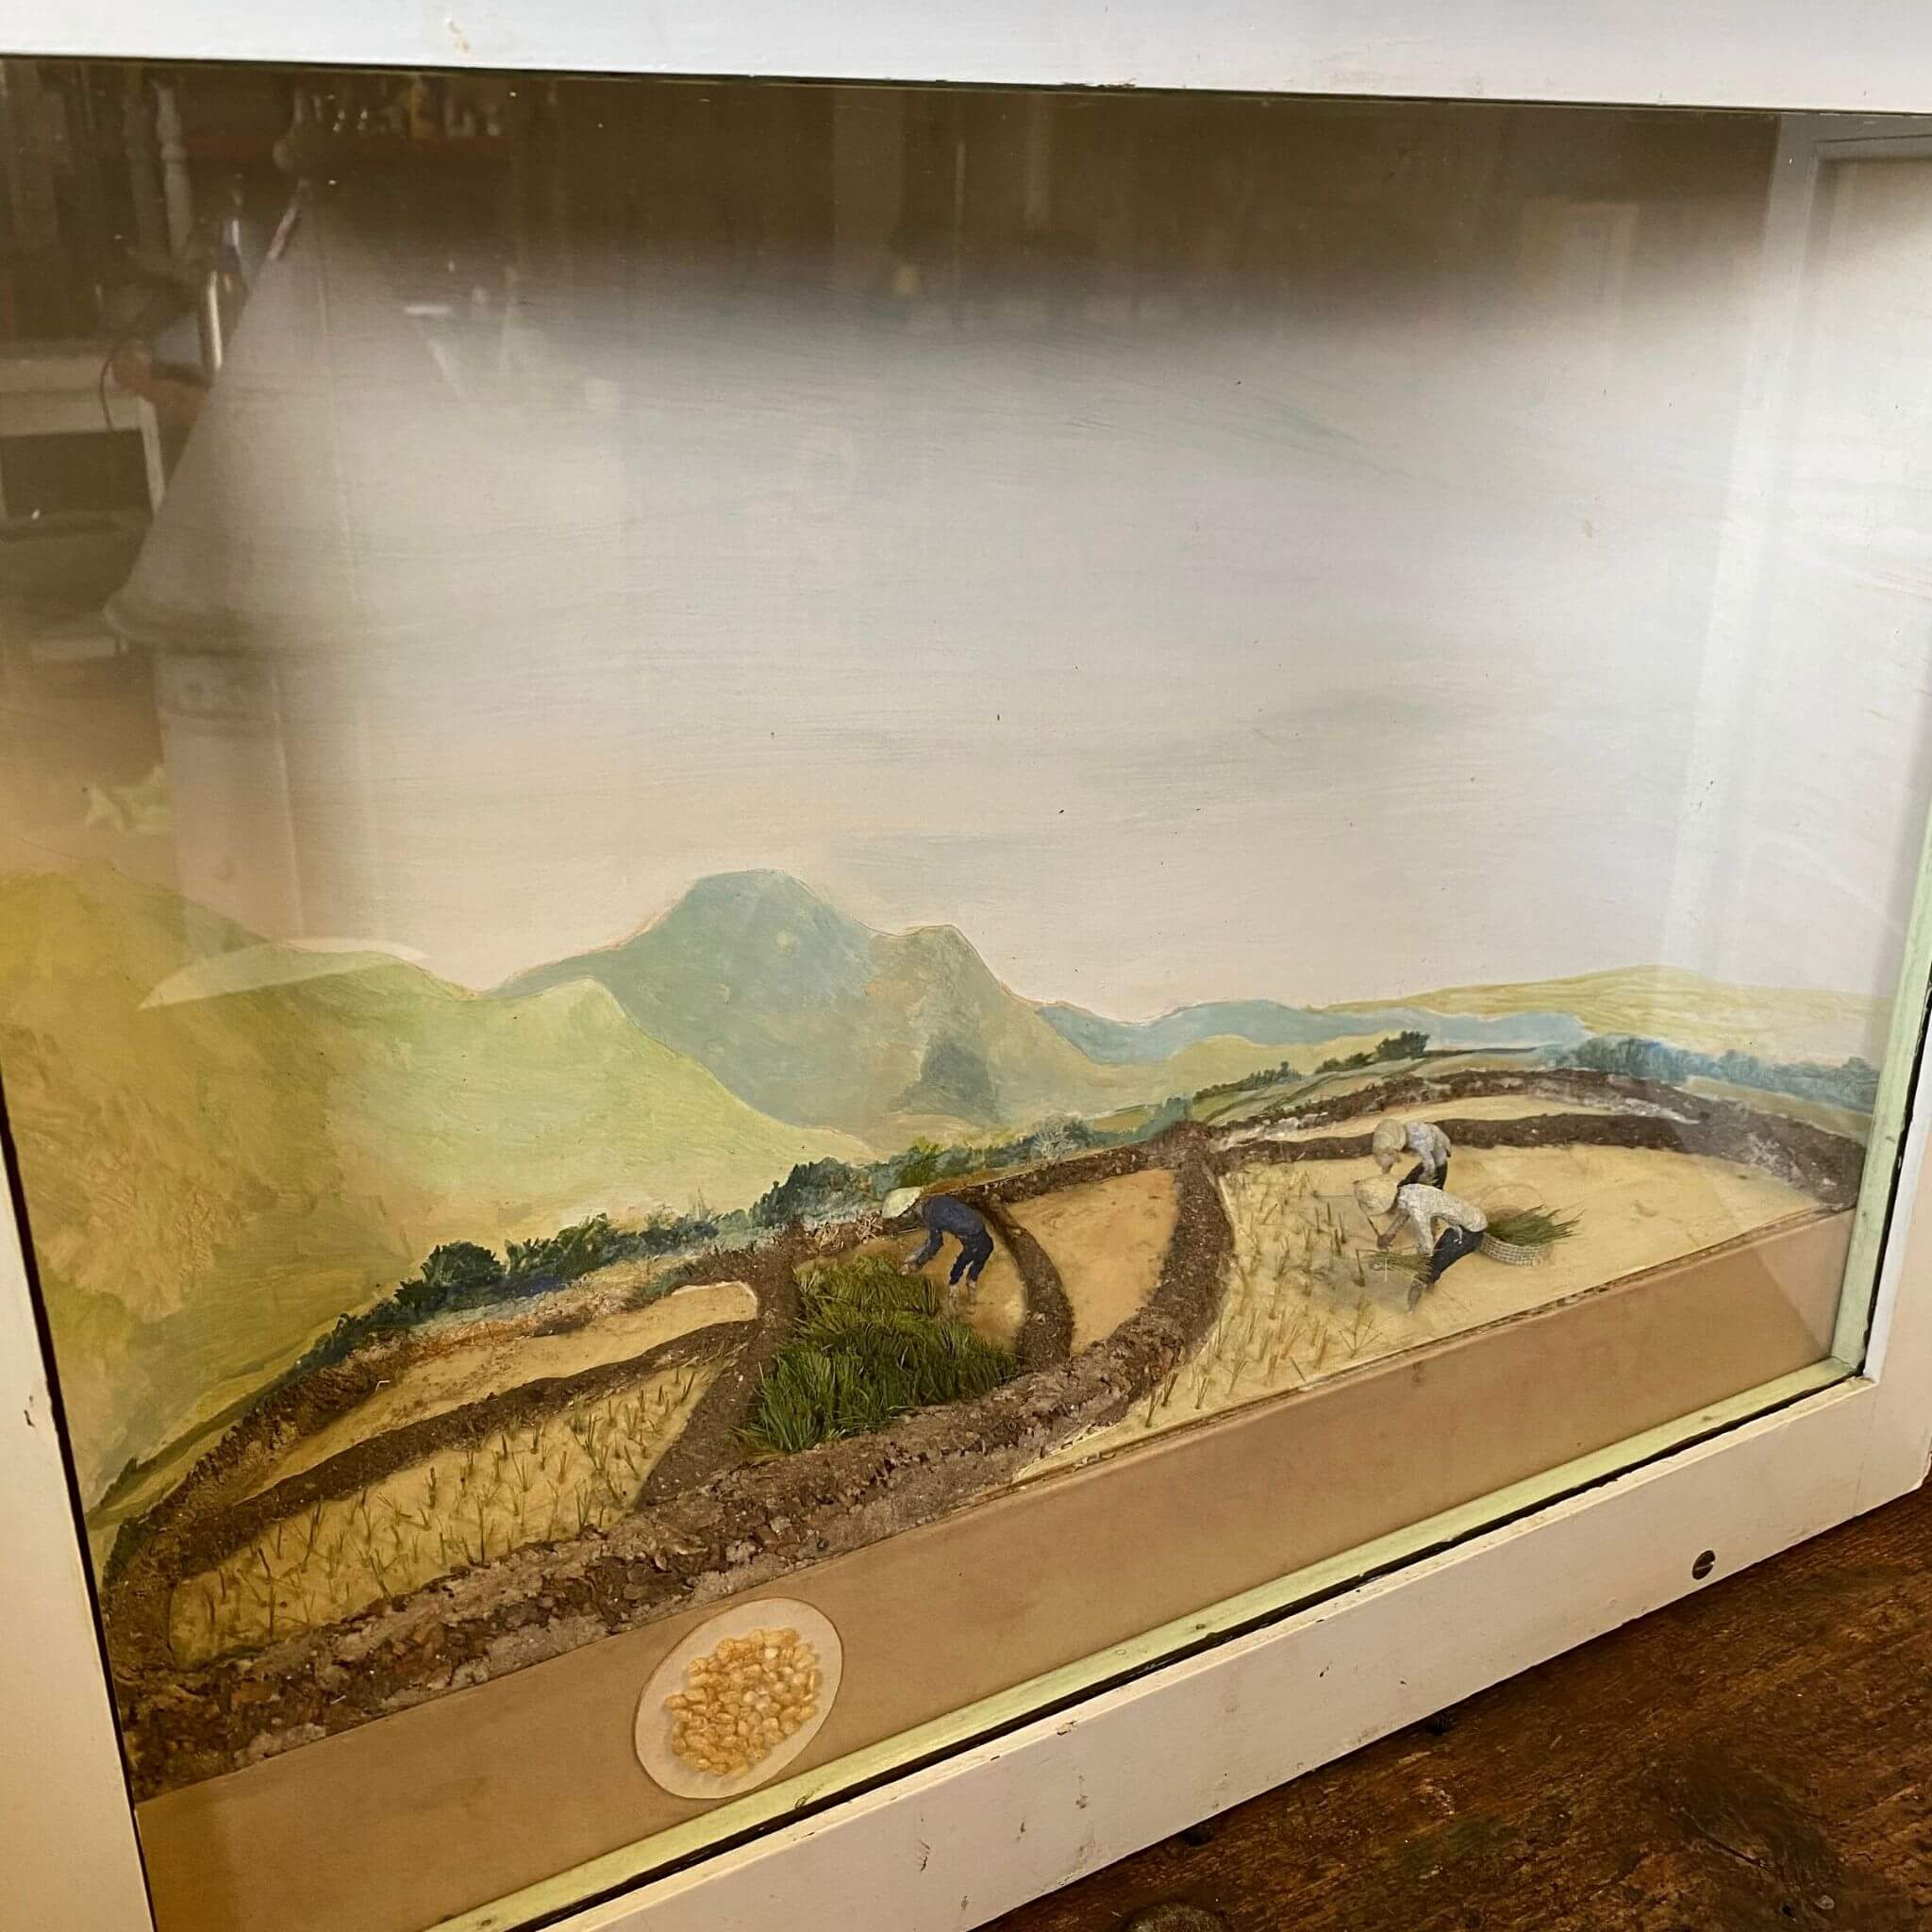 Collectible Auckland Museum Rice Diorama